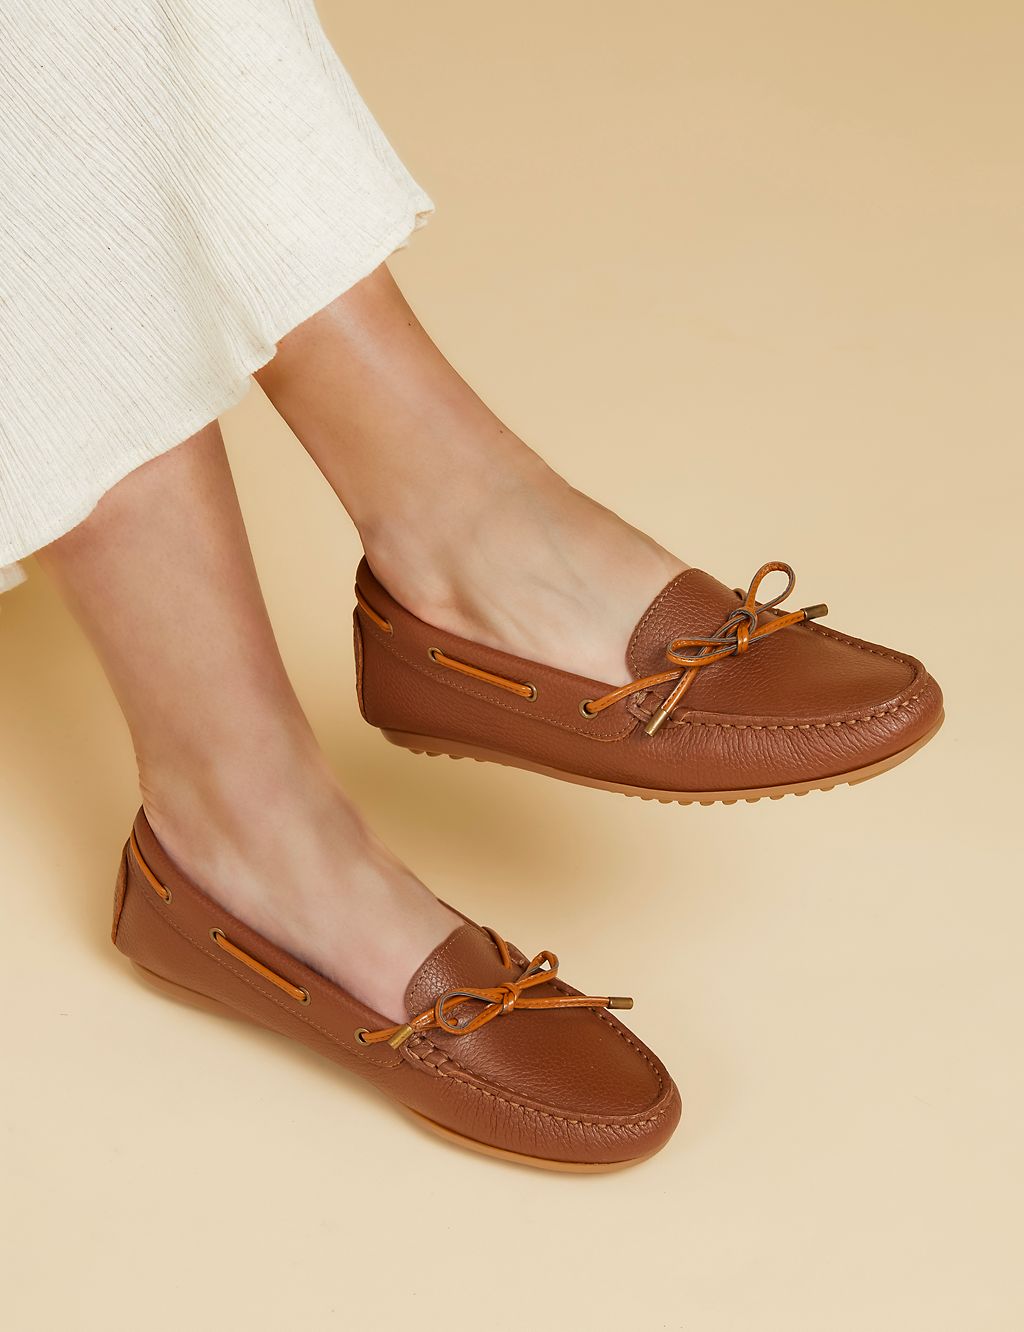 Leather Bow Slip On Flat Boat Shoes 2 of 7